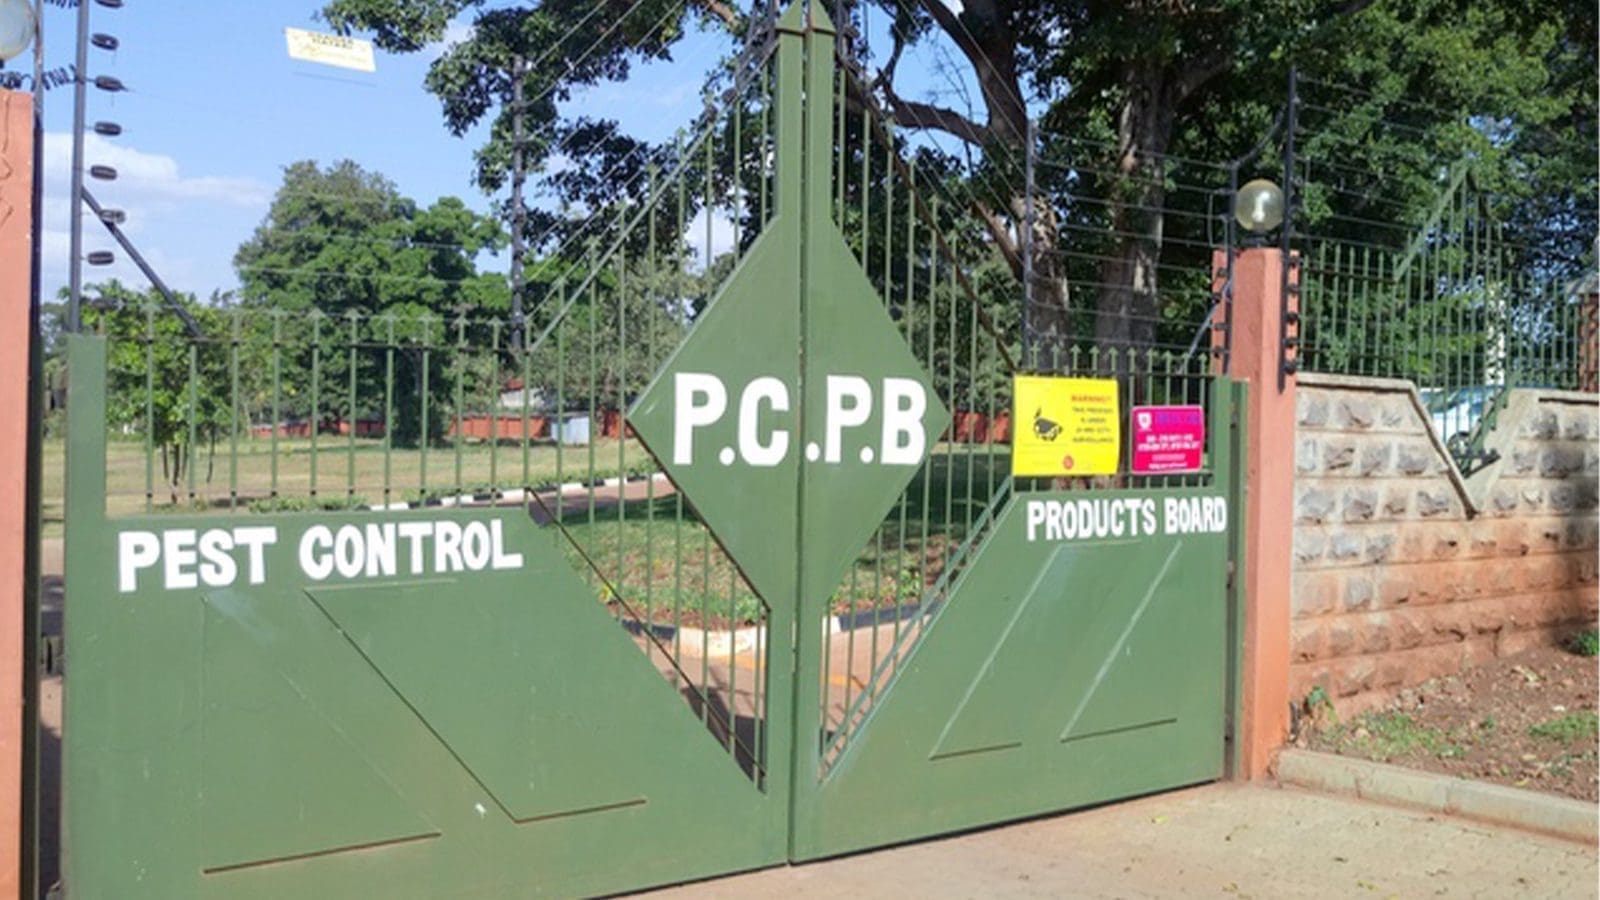 Kenya’s Pest Control Products Board initiates sweeping ban on hazardous pesticides